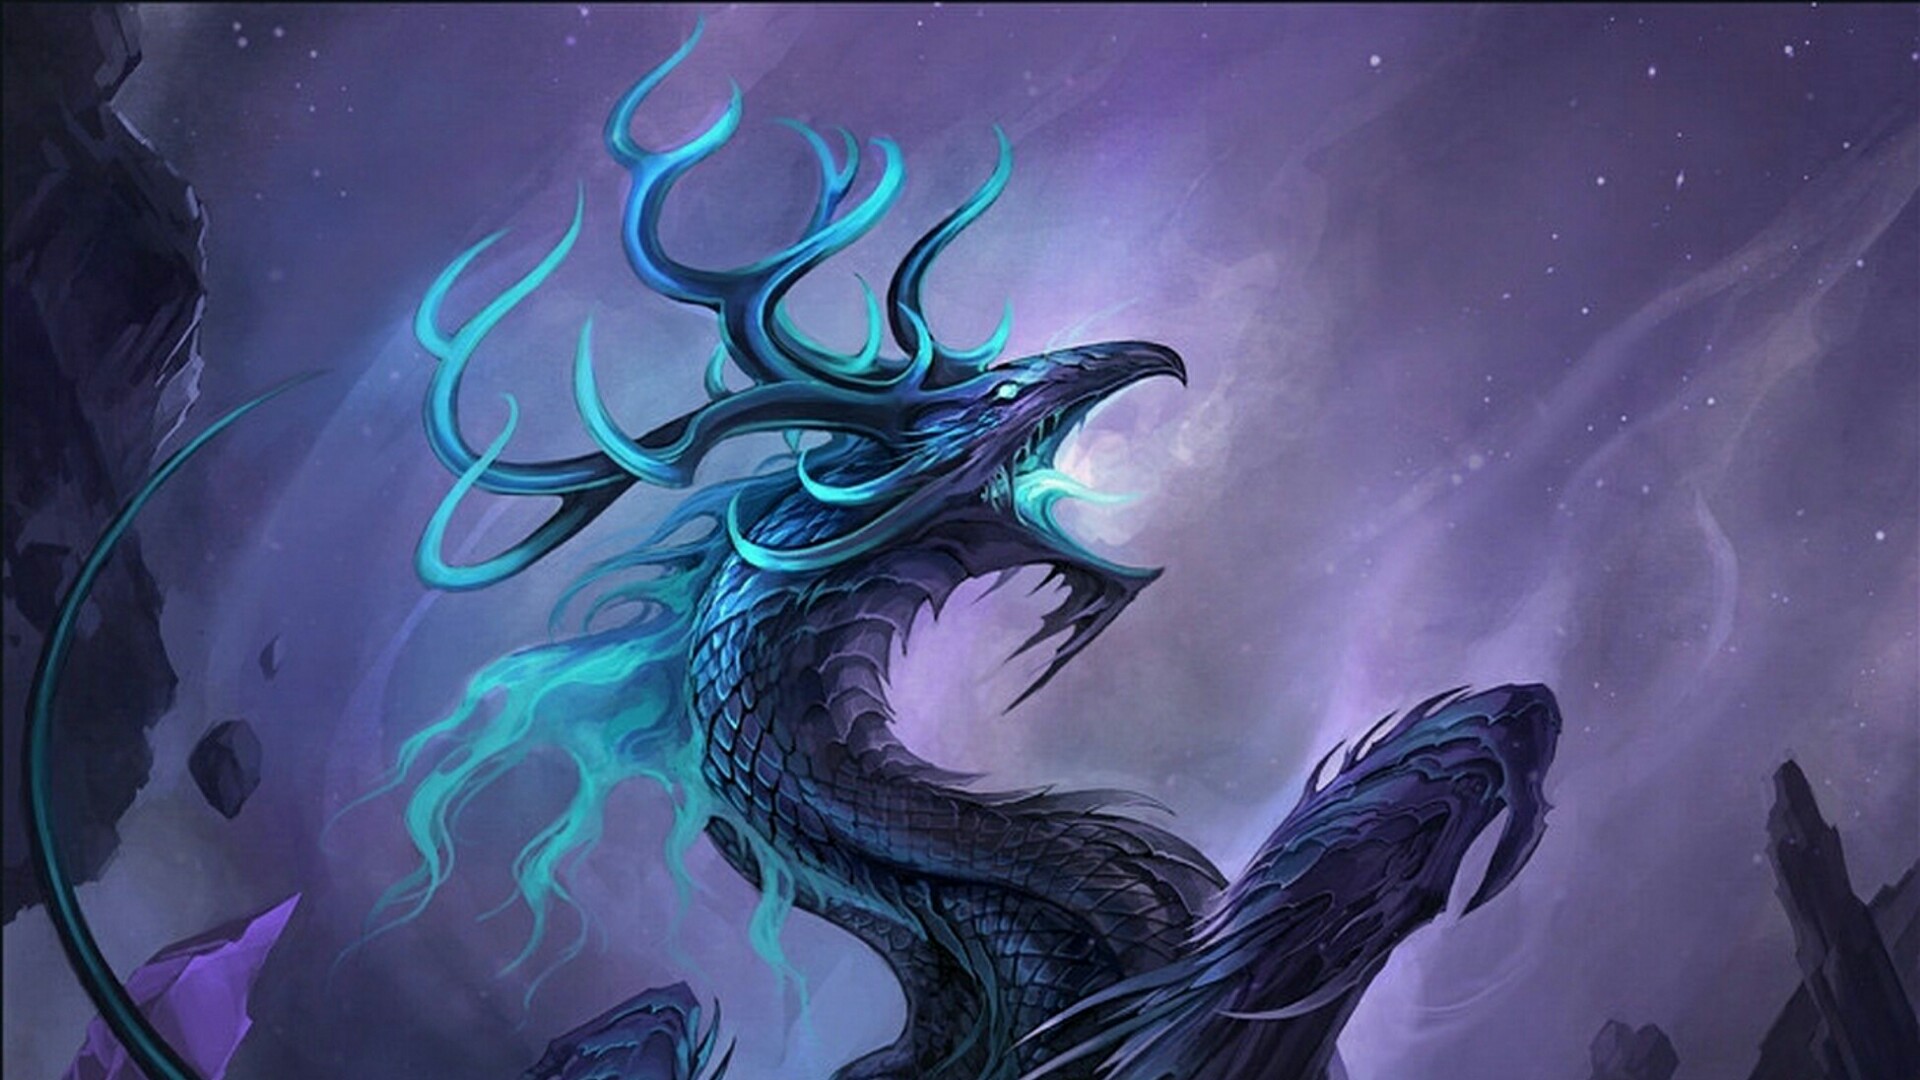 Download Ice dragon wallpaper - backiee